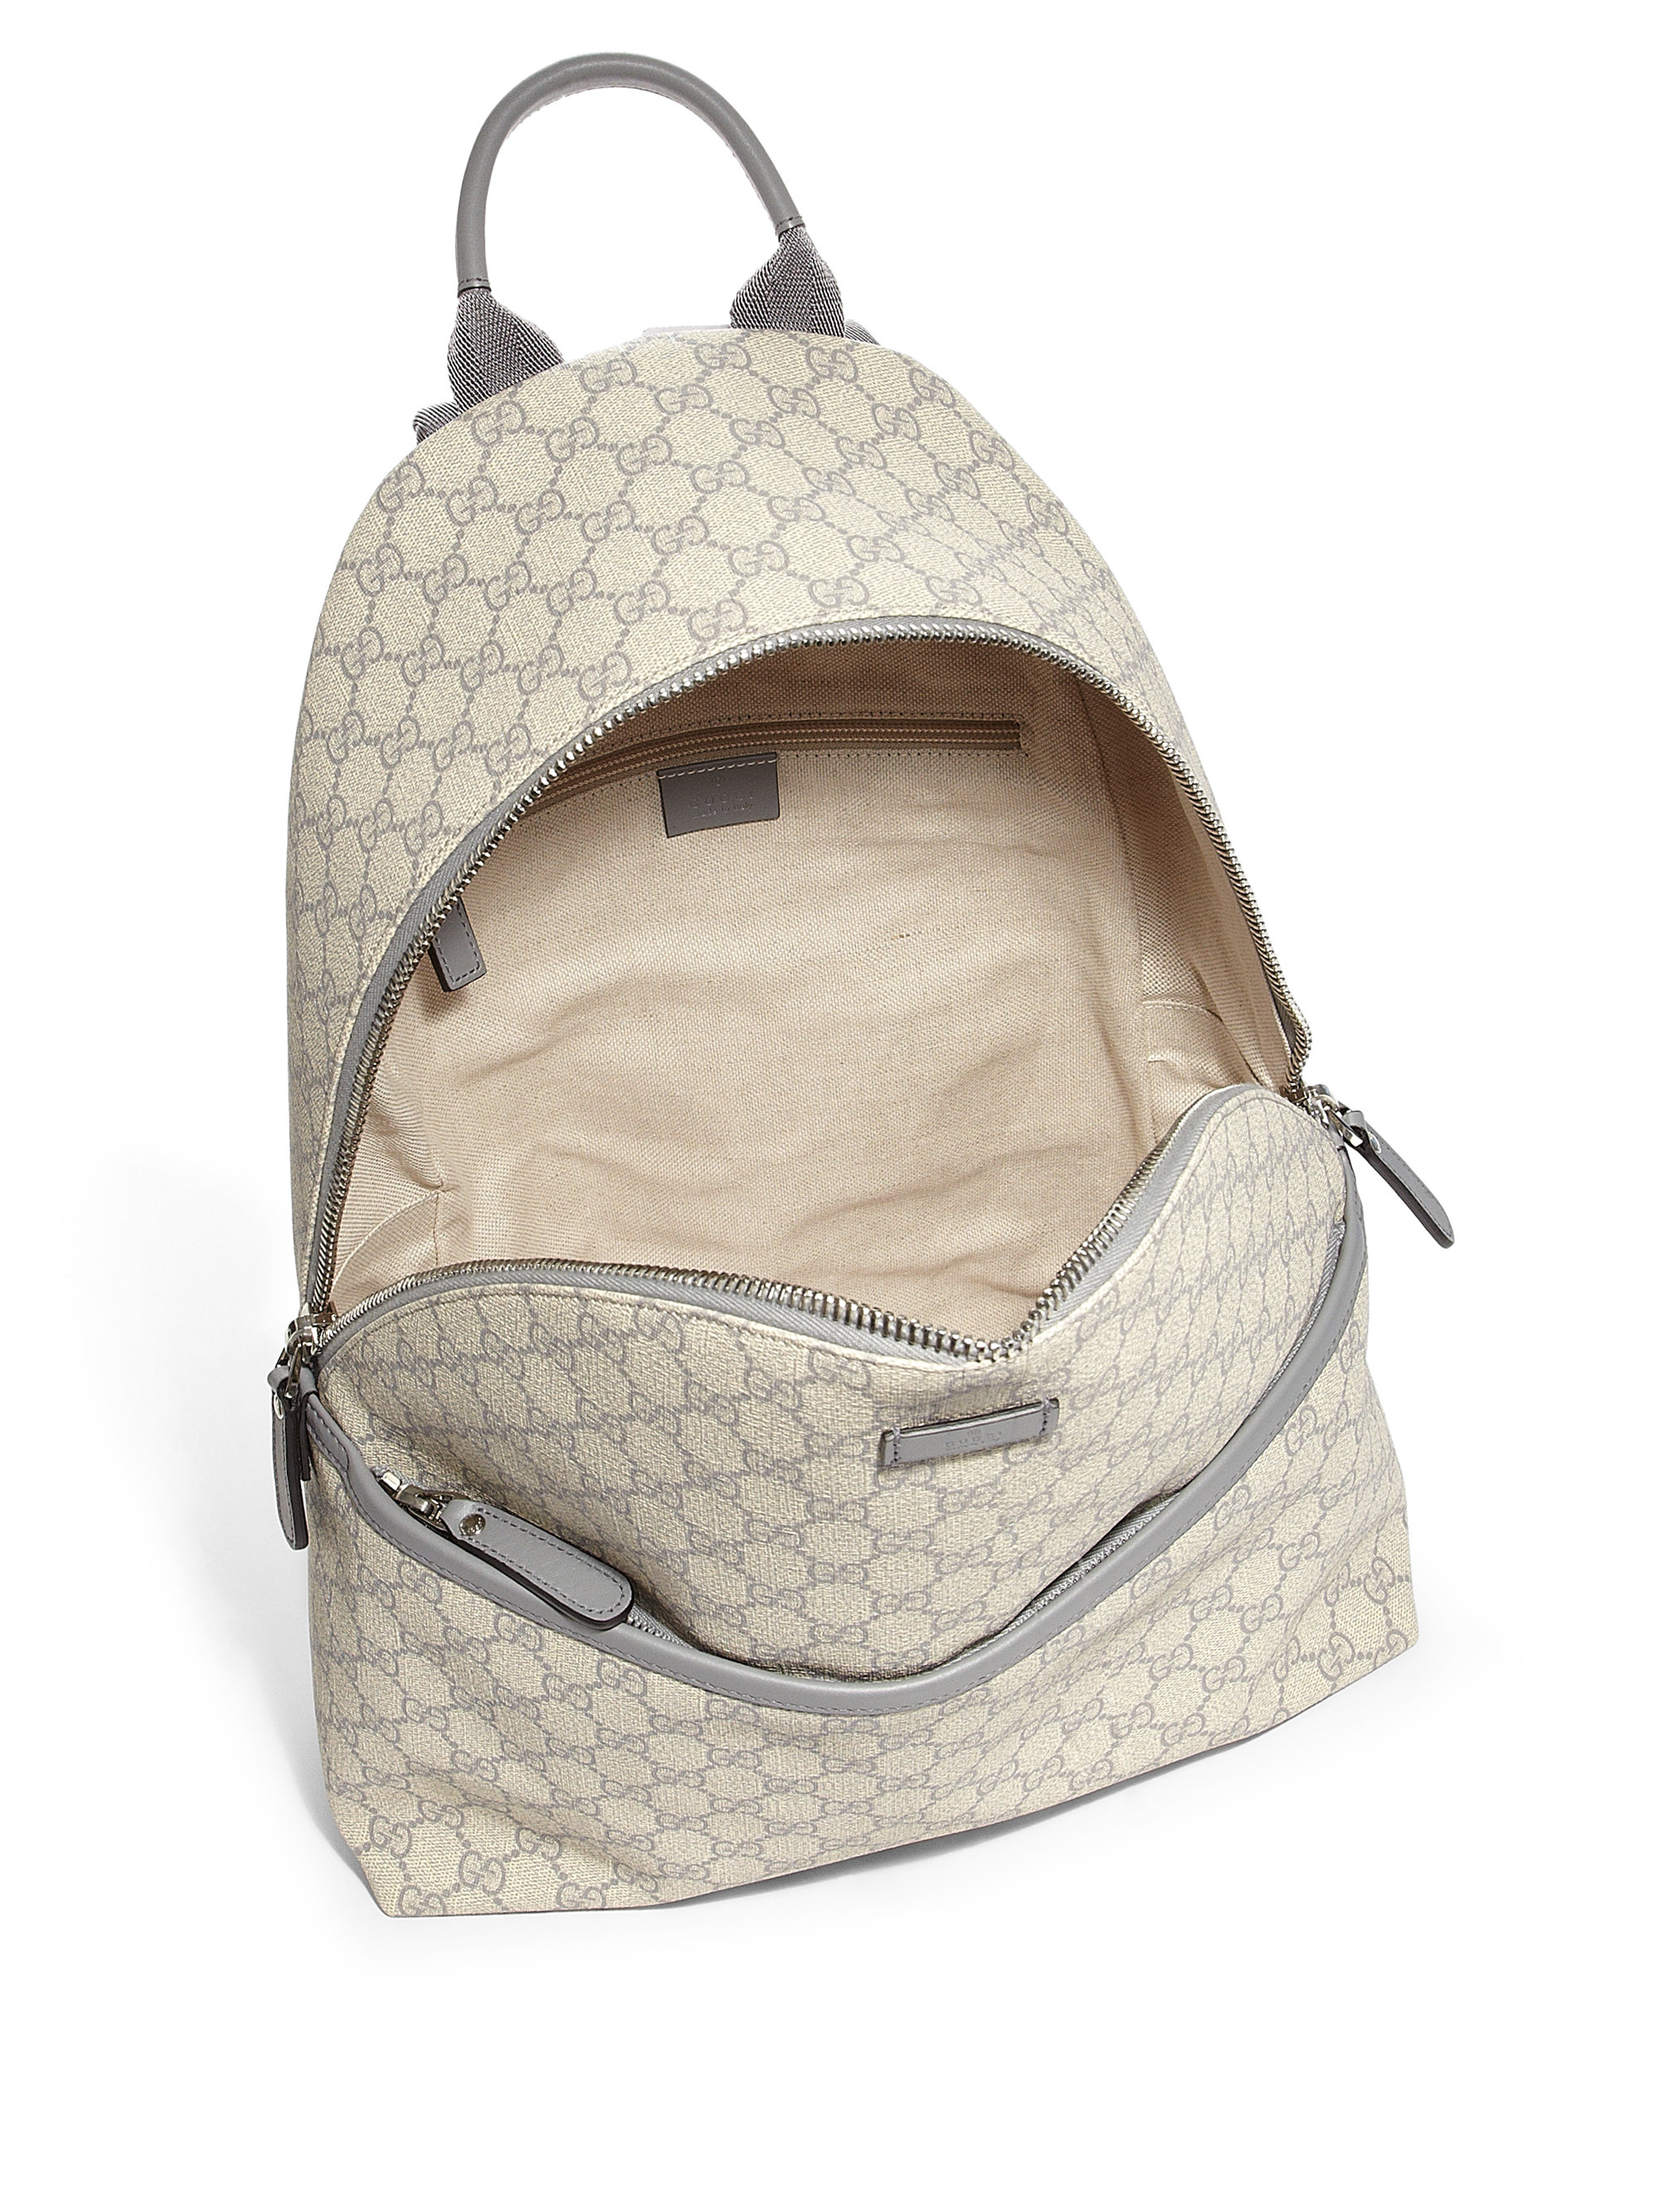 Lyst - Gucci Gg Supreme Canvas Backpack in Gray for Men